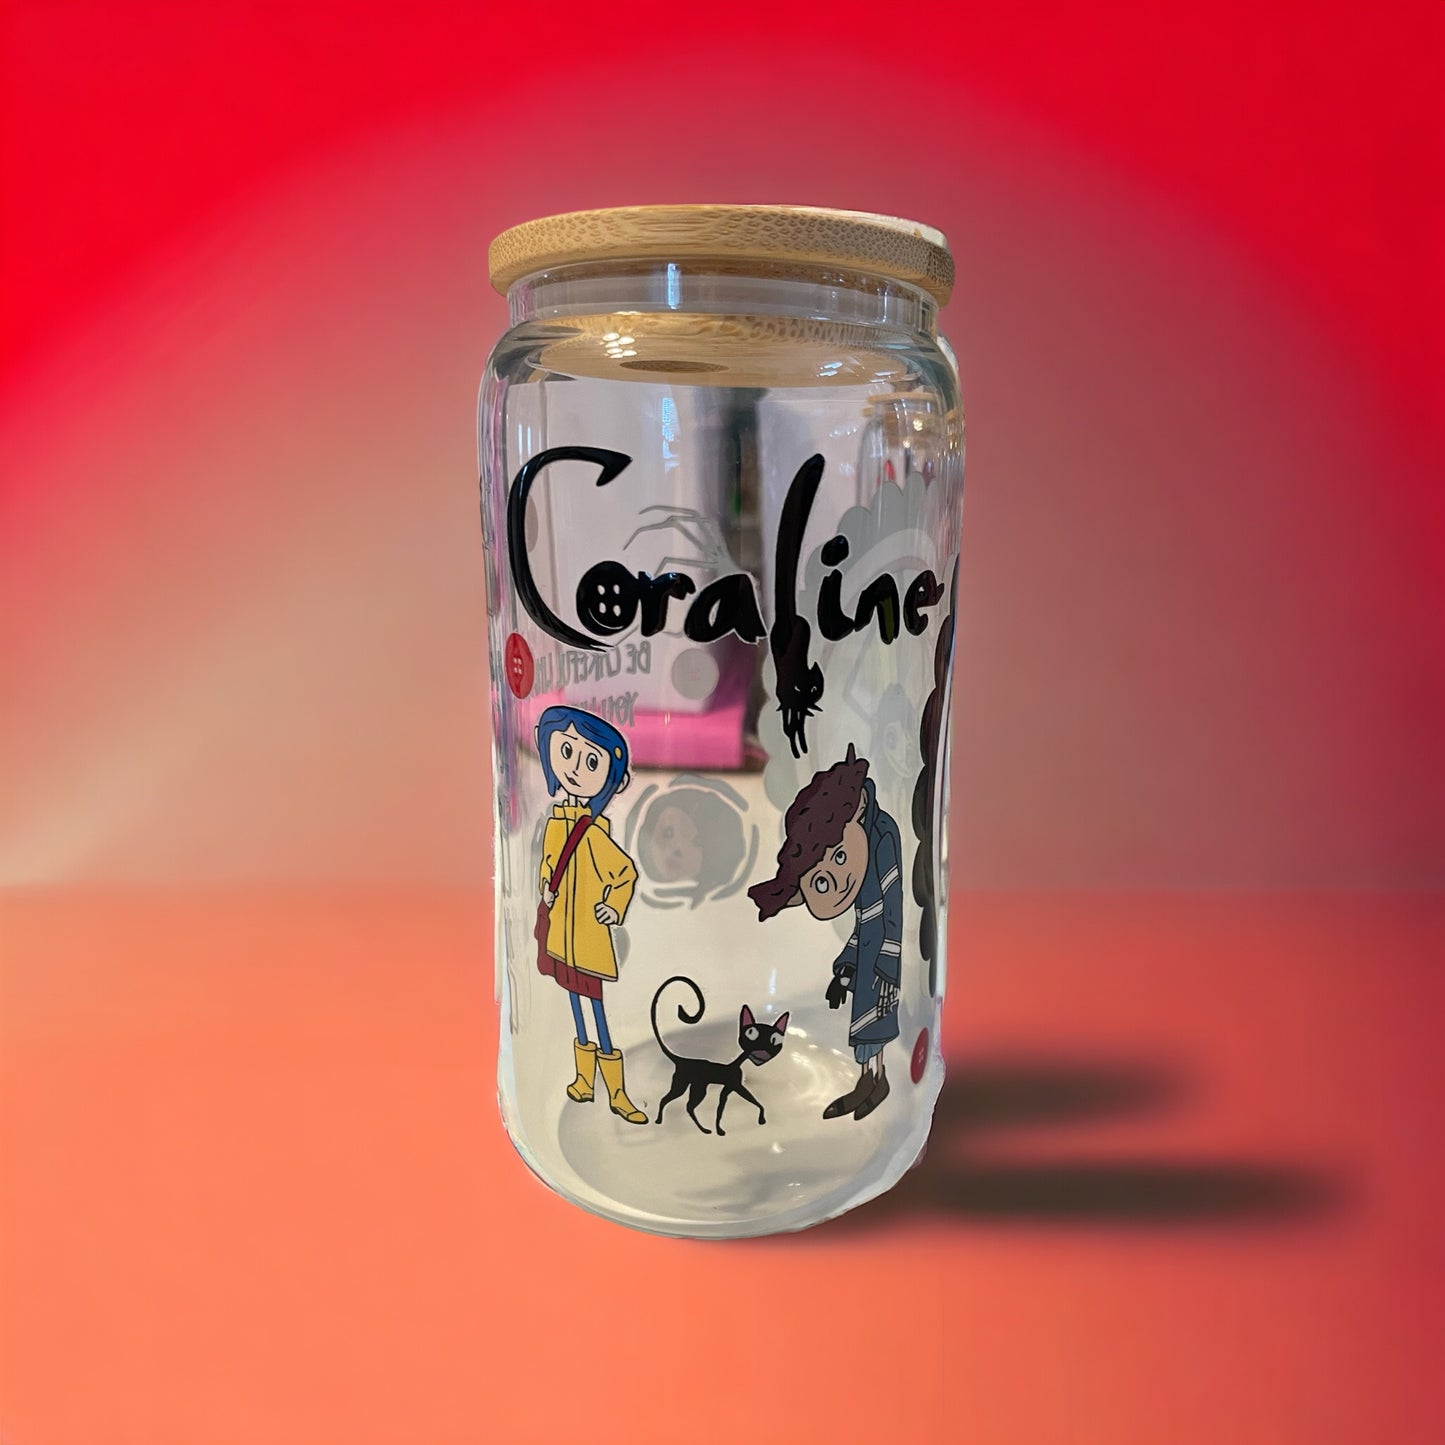 Coraline 16oz. Glass Can with Straw, Glass Can, Beer Can, Coraline Cup, Cups with Straws, Glass Cup with Straw and Bamboo Lid